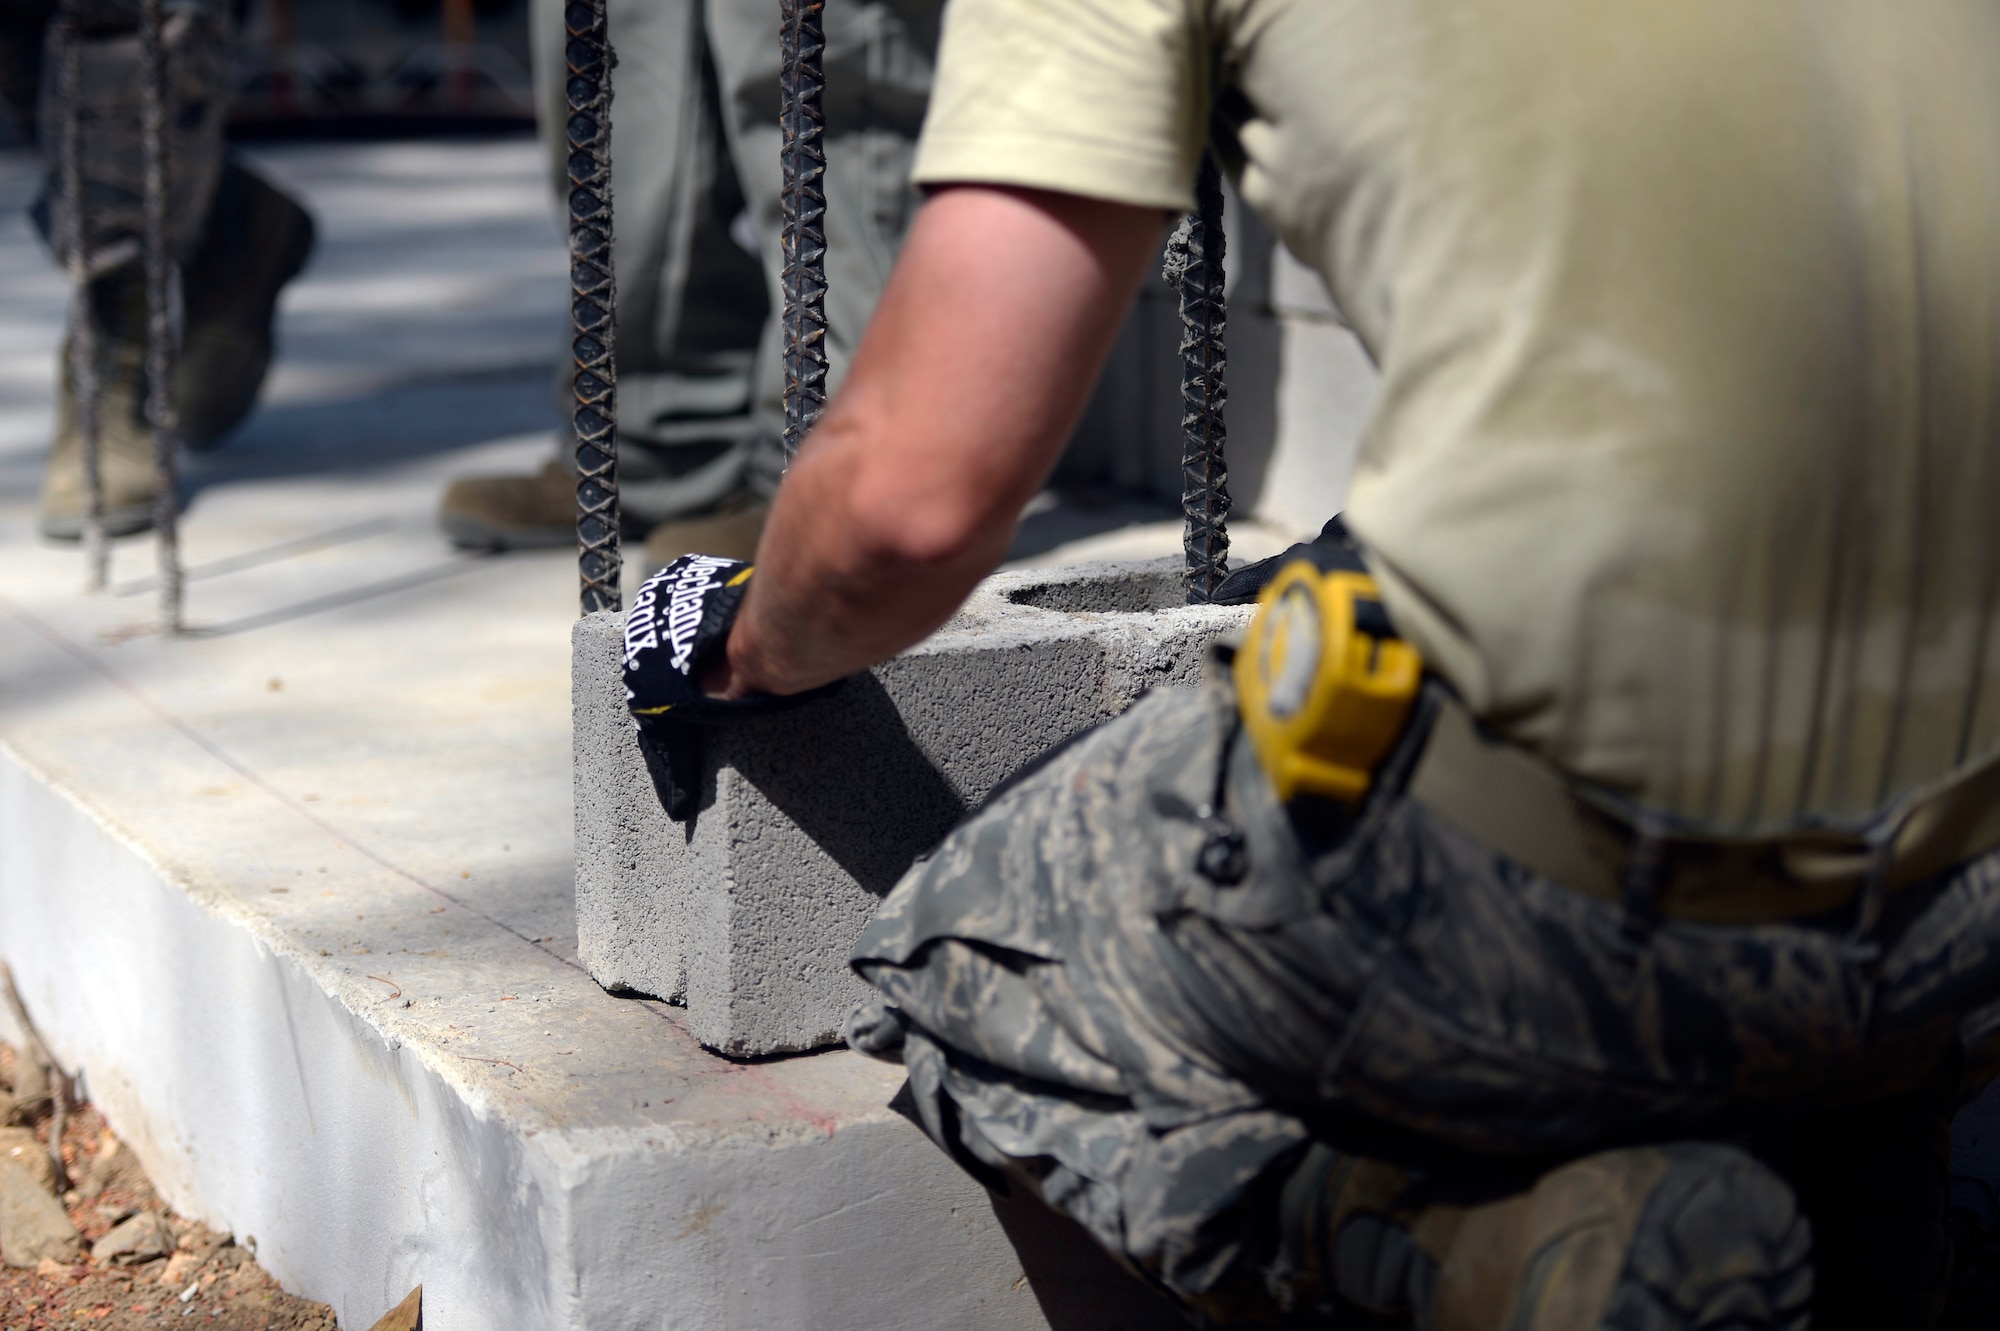 Staff Sgt. Nathaniel Rosier, 823rd Expeditionary RED HORSE Squadron structural supervisor, does what’s known as “chasing the band” to determine is the block he is laying will lay right when mortar is applied during construction at the Gabriela Mistral school in Ocotoes Alto, Honduras, June 1, 2015. Rosier, a Painesville, Ohio, native, is one part of the New Horizons Honduras 2015 training exercise taking place throughout Trujillo and Tocoa. U.S. Air Force Staff Sgt. Nathaniel Rosier, 823rd Expeditionary RED HORSE Squadron structural supervisor, does what’s known as “chasing the band” to determine is the block he is laying will lay right when mortar is applied during construction at the Gabriela Mistral school in Ocotoes Alto, Honduras, June 1, 2015. Rosier, a Painesville, Ohio, native, is one part of the New Horizons Honduras 2015 training exercise taking place throughout Trujillo and Tocoa. New Horizons was launched in the 1980s and is an annual joint humanitarian assistance exercise that U.S. Southern Command conducts with a partner nation in Central America, South America or the Caribbean. The exercise improves joint training readiness of U.S. and partner nation civil engineers, medical professionals and support personnel through humanitarian assistance activities. (U.S. Air Force photo by Capt. David J. Murphy/Released)